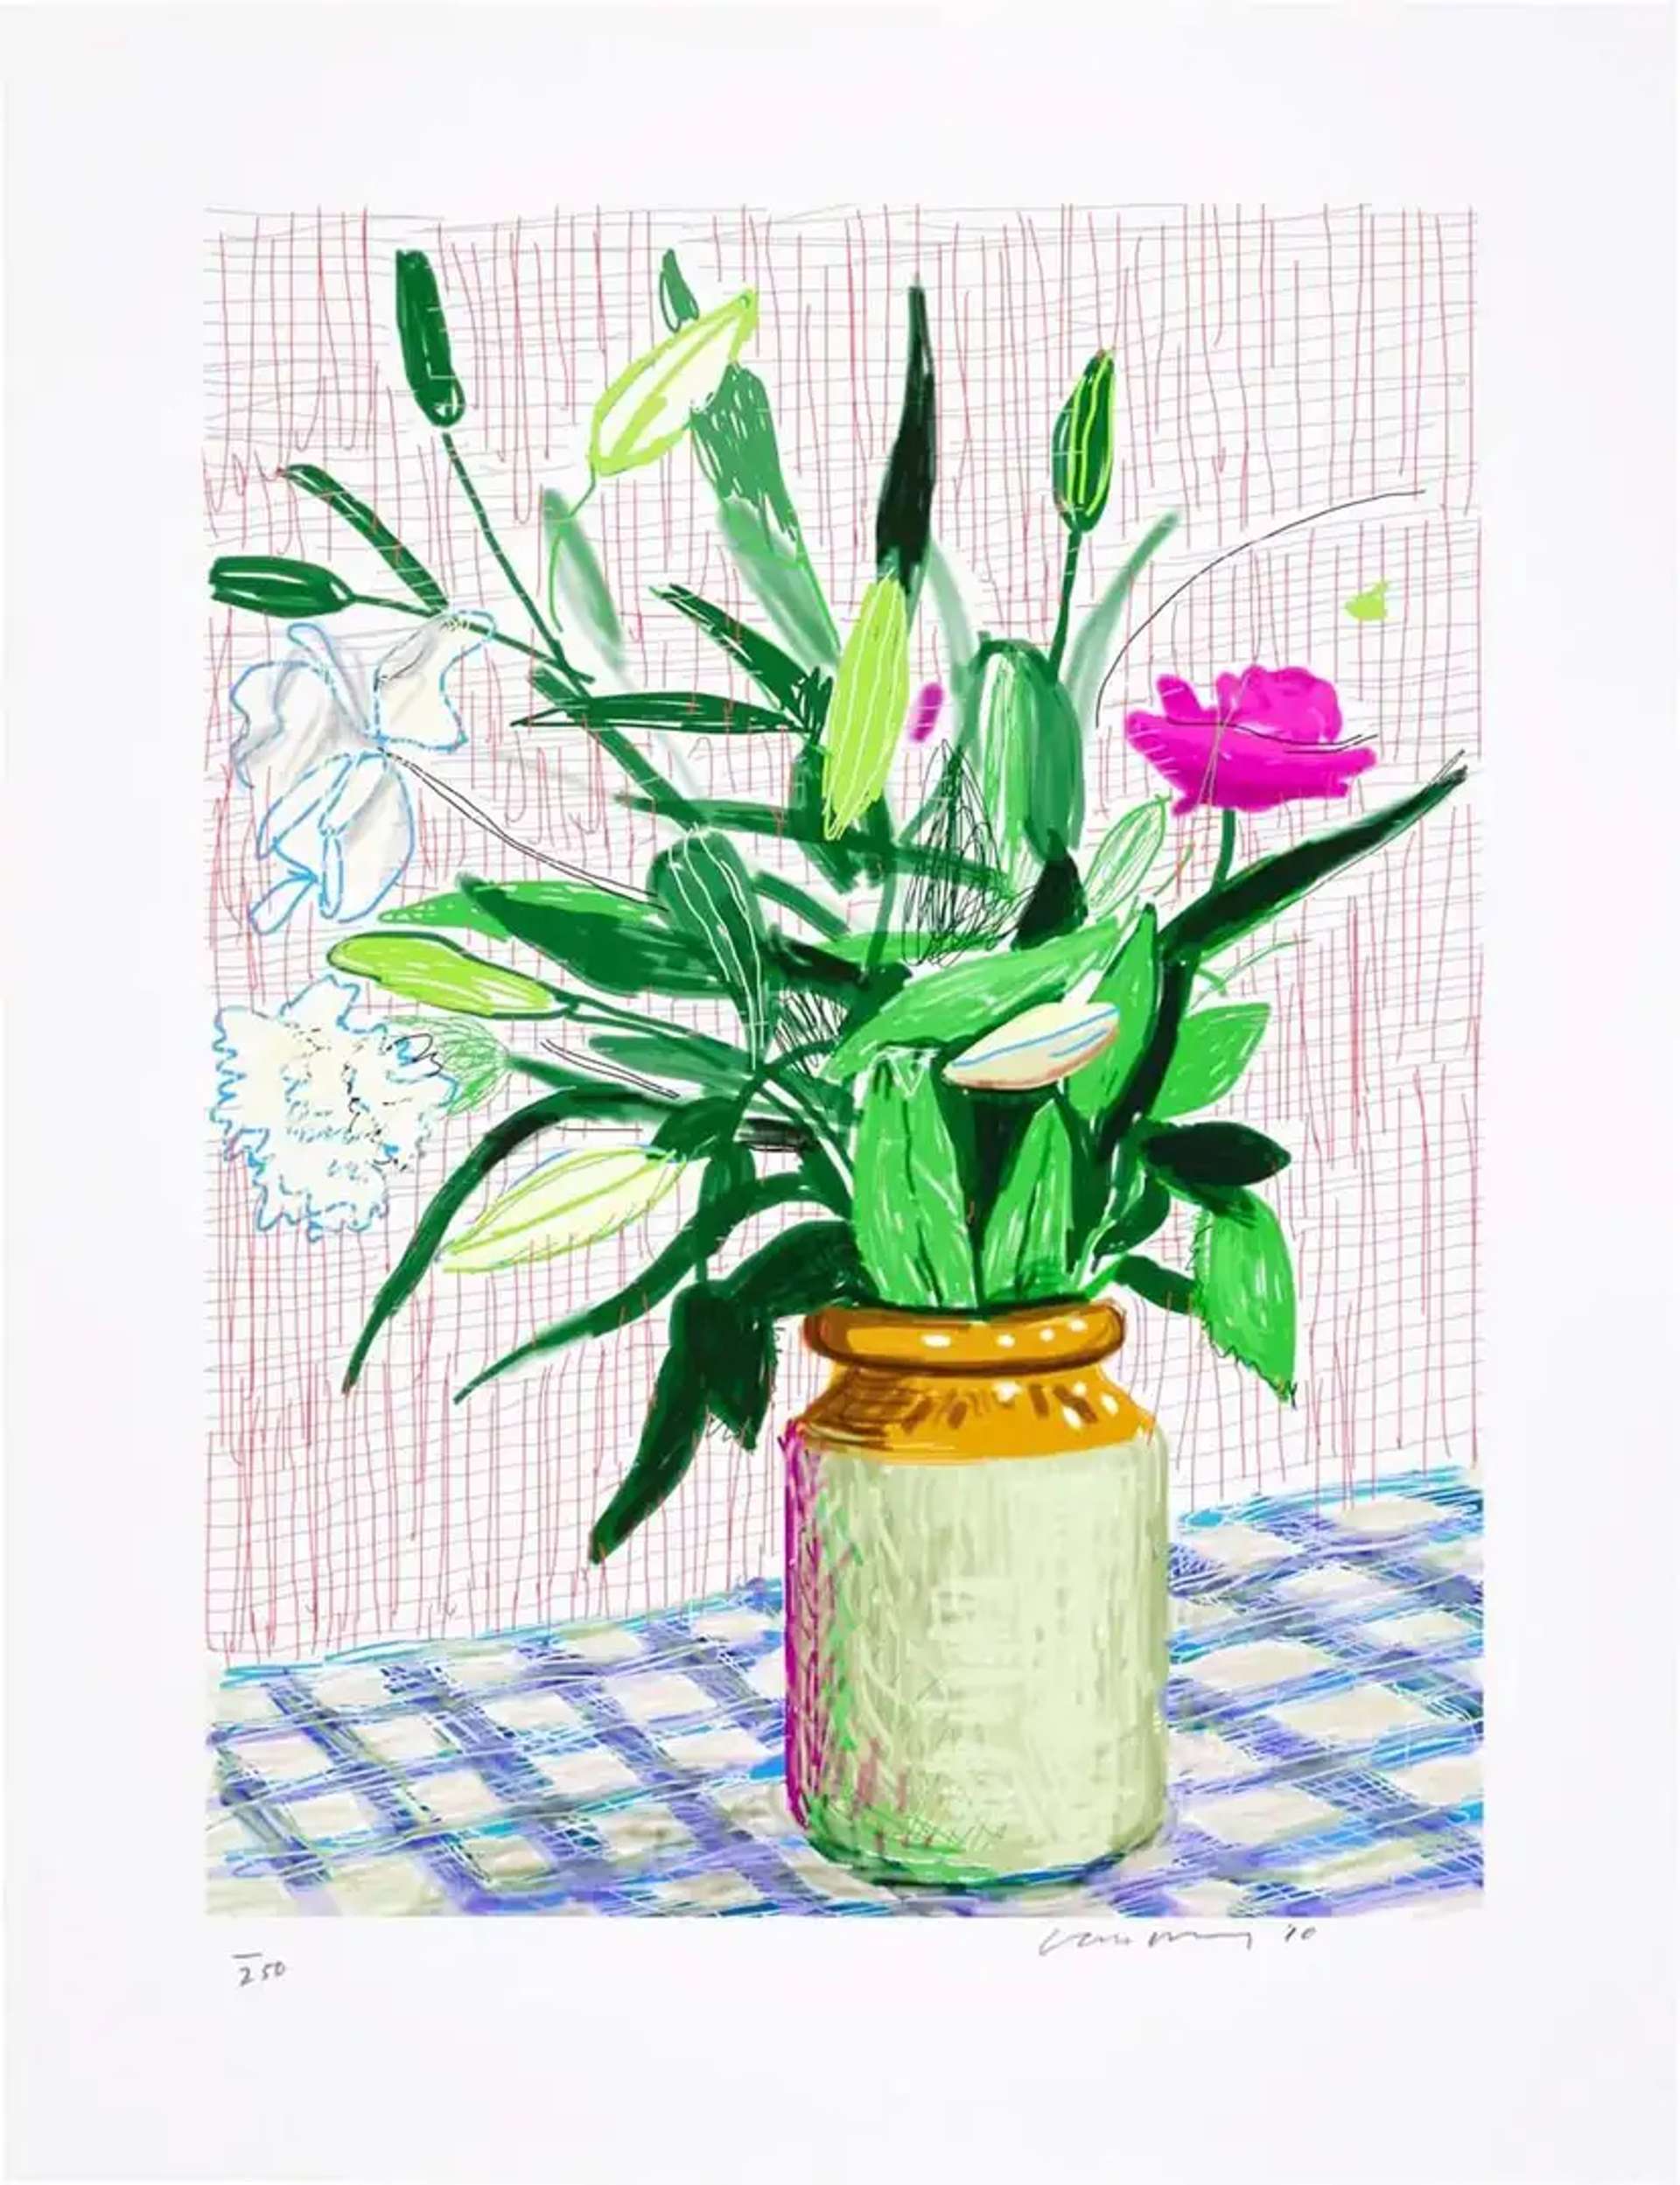 An image of one of David Hockney's artworks, showing a colourful flower vase depicted in bright green. The background is etched in fine lines, and the vase sits on a checkered tablecloth.